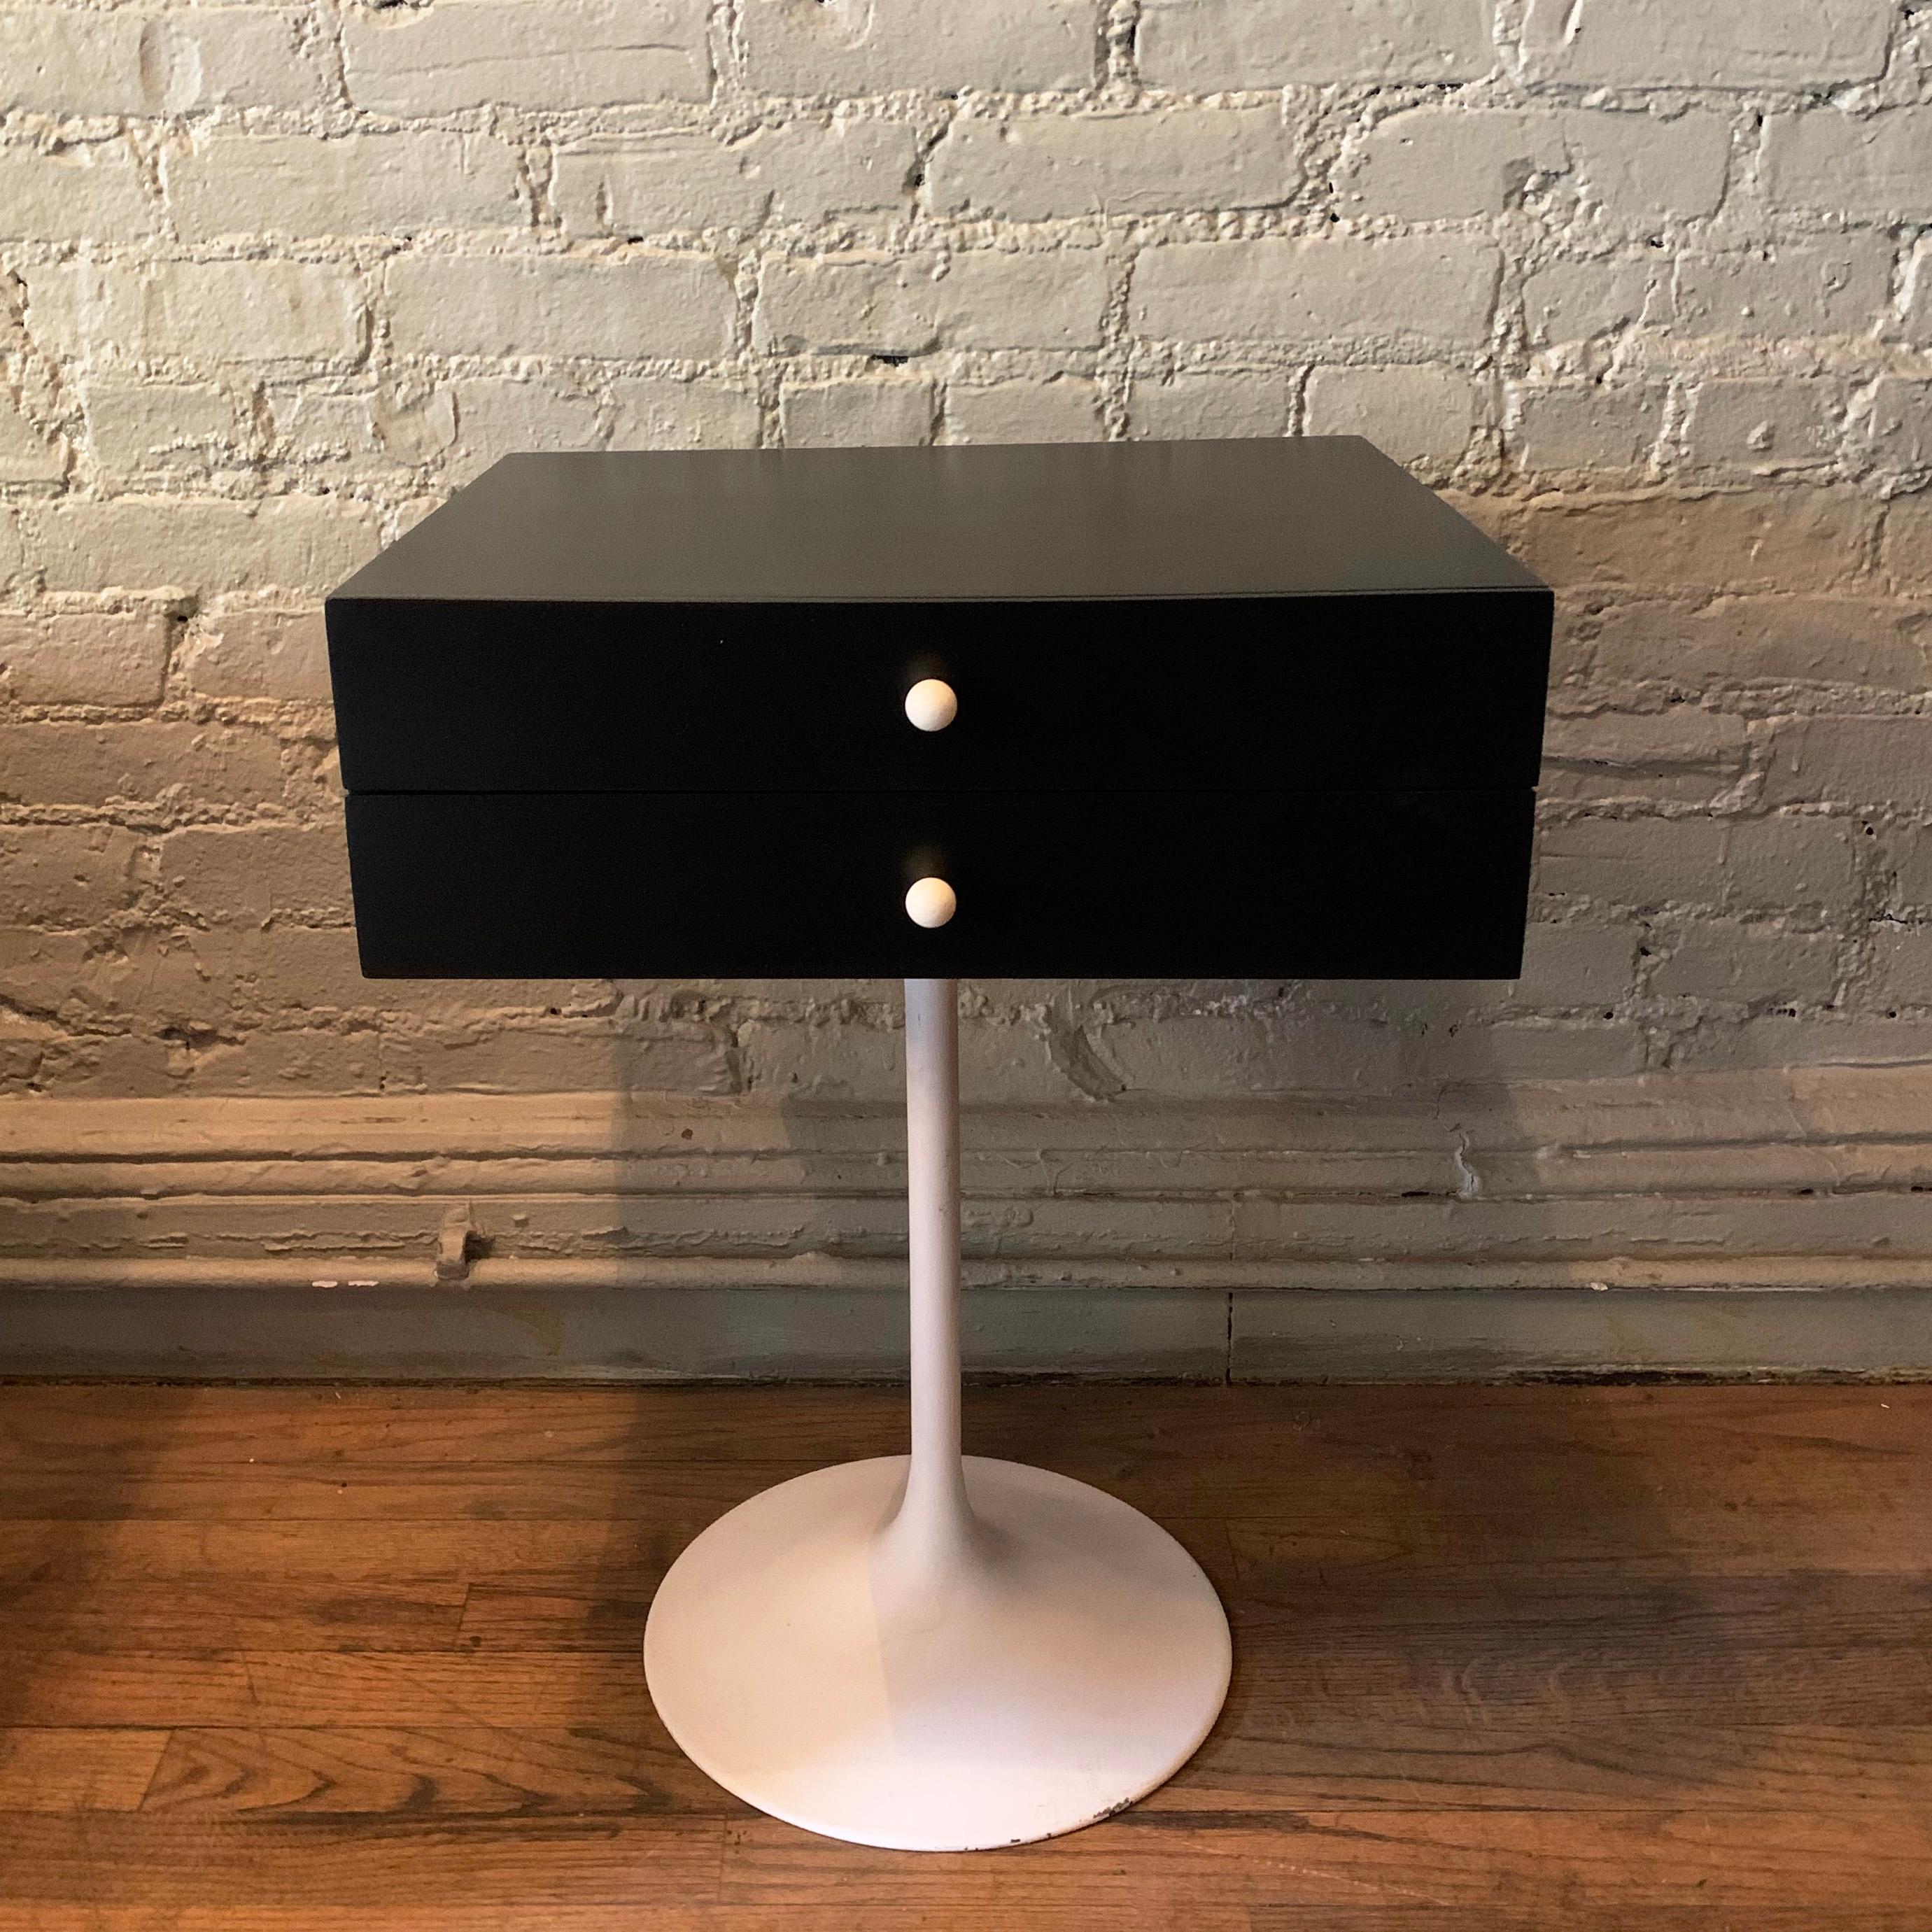 Mid-Century Modern, side table or nightstand features a white tulip base with contrasting black, two drawer top with white porcelain pulls. Cabinet height is 6 inches.